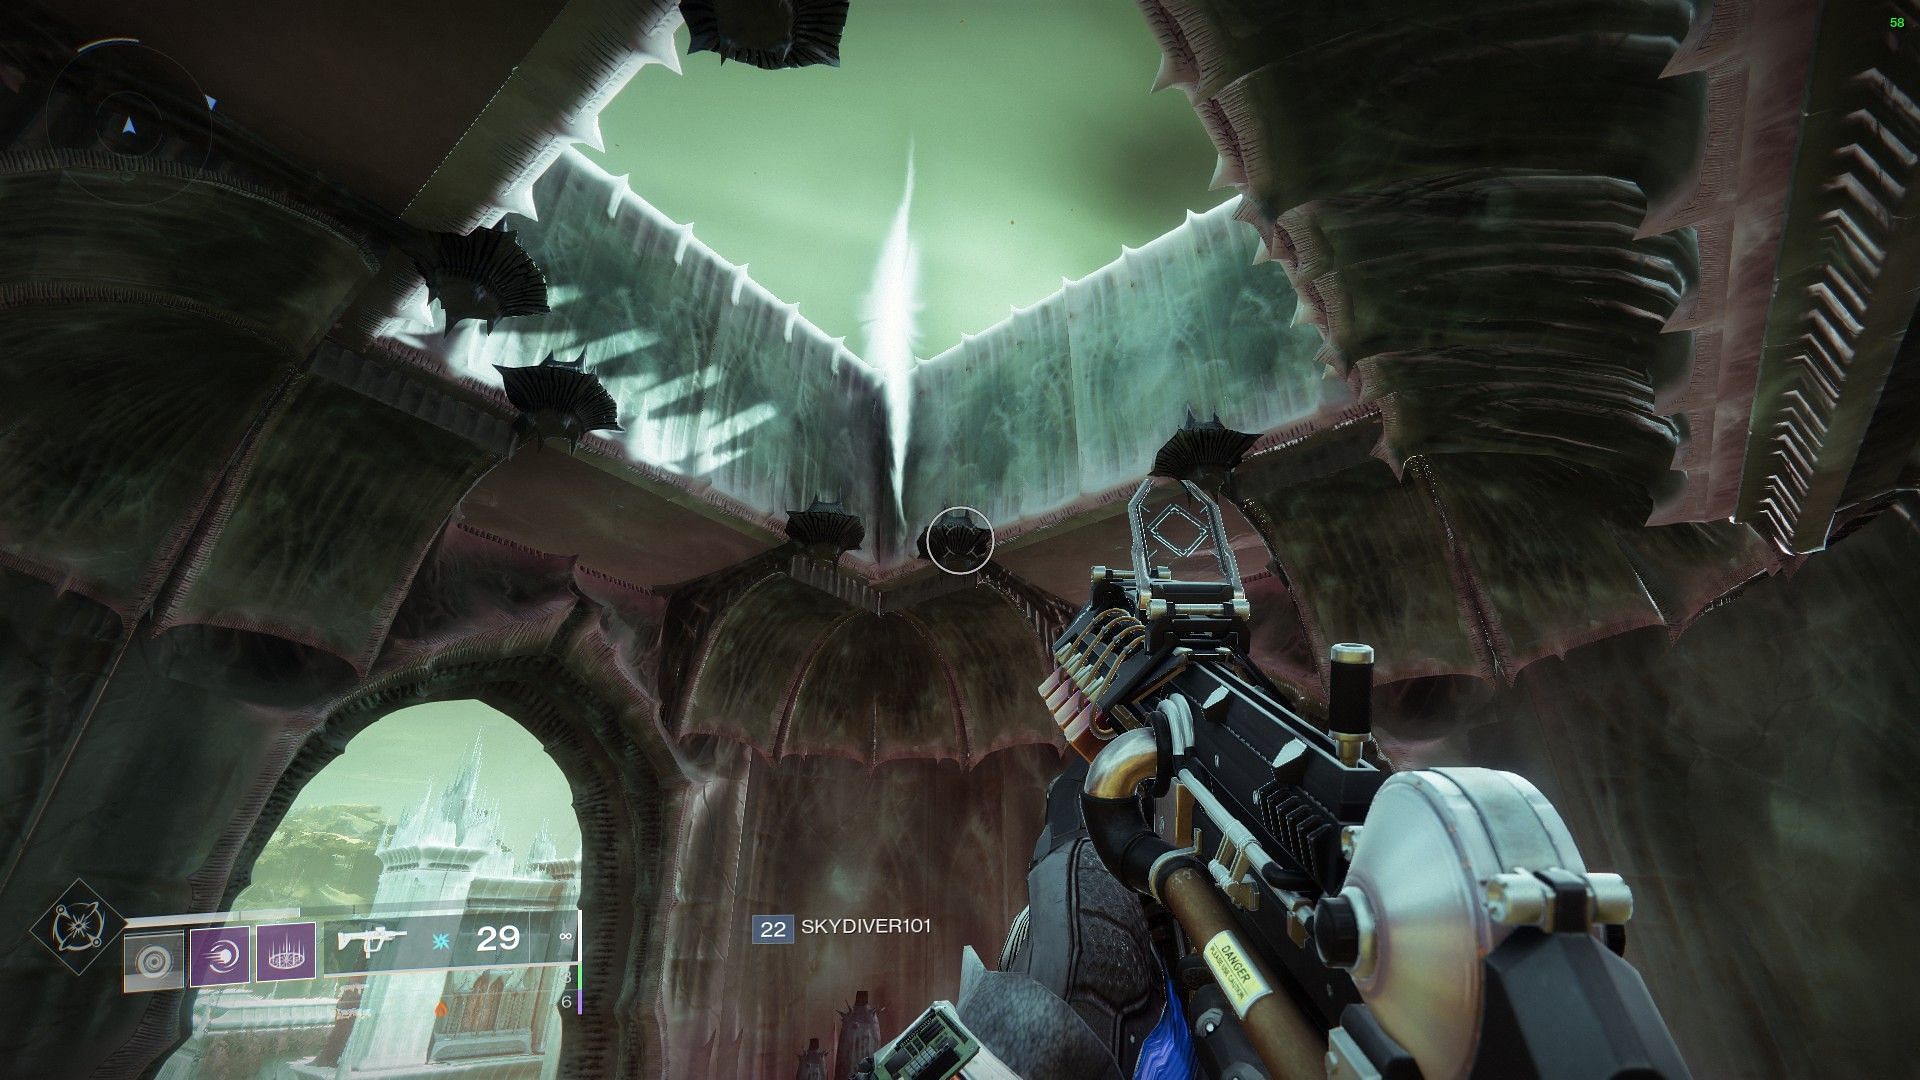 Darkness Rift, located within the Throne World (Image via Bungie)